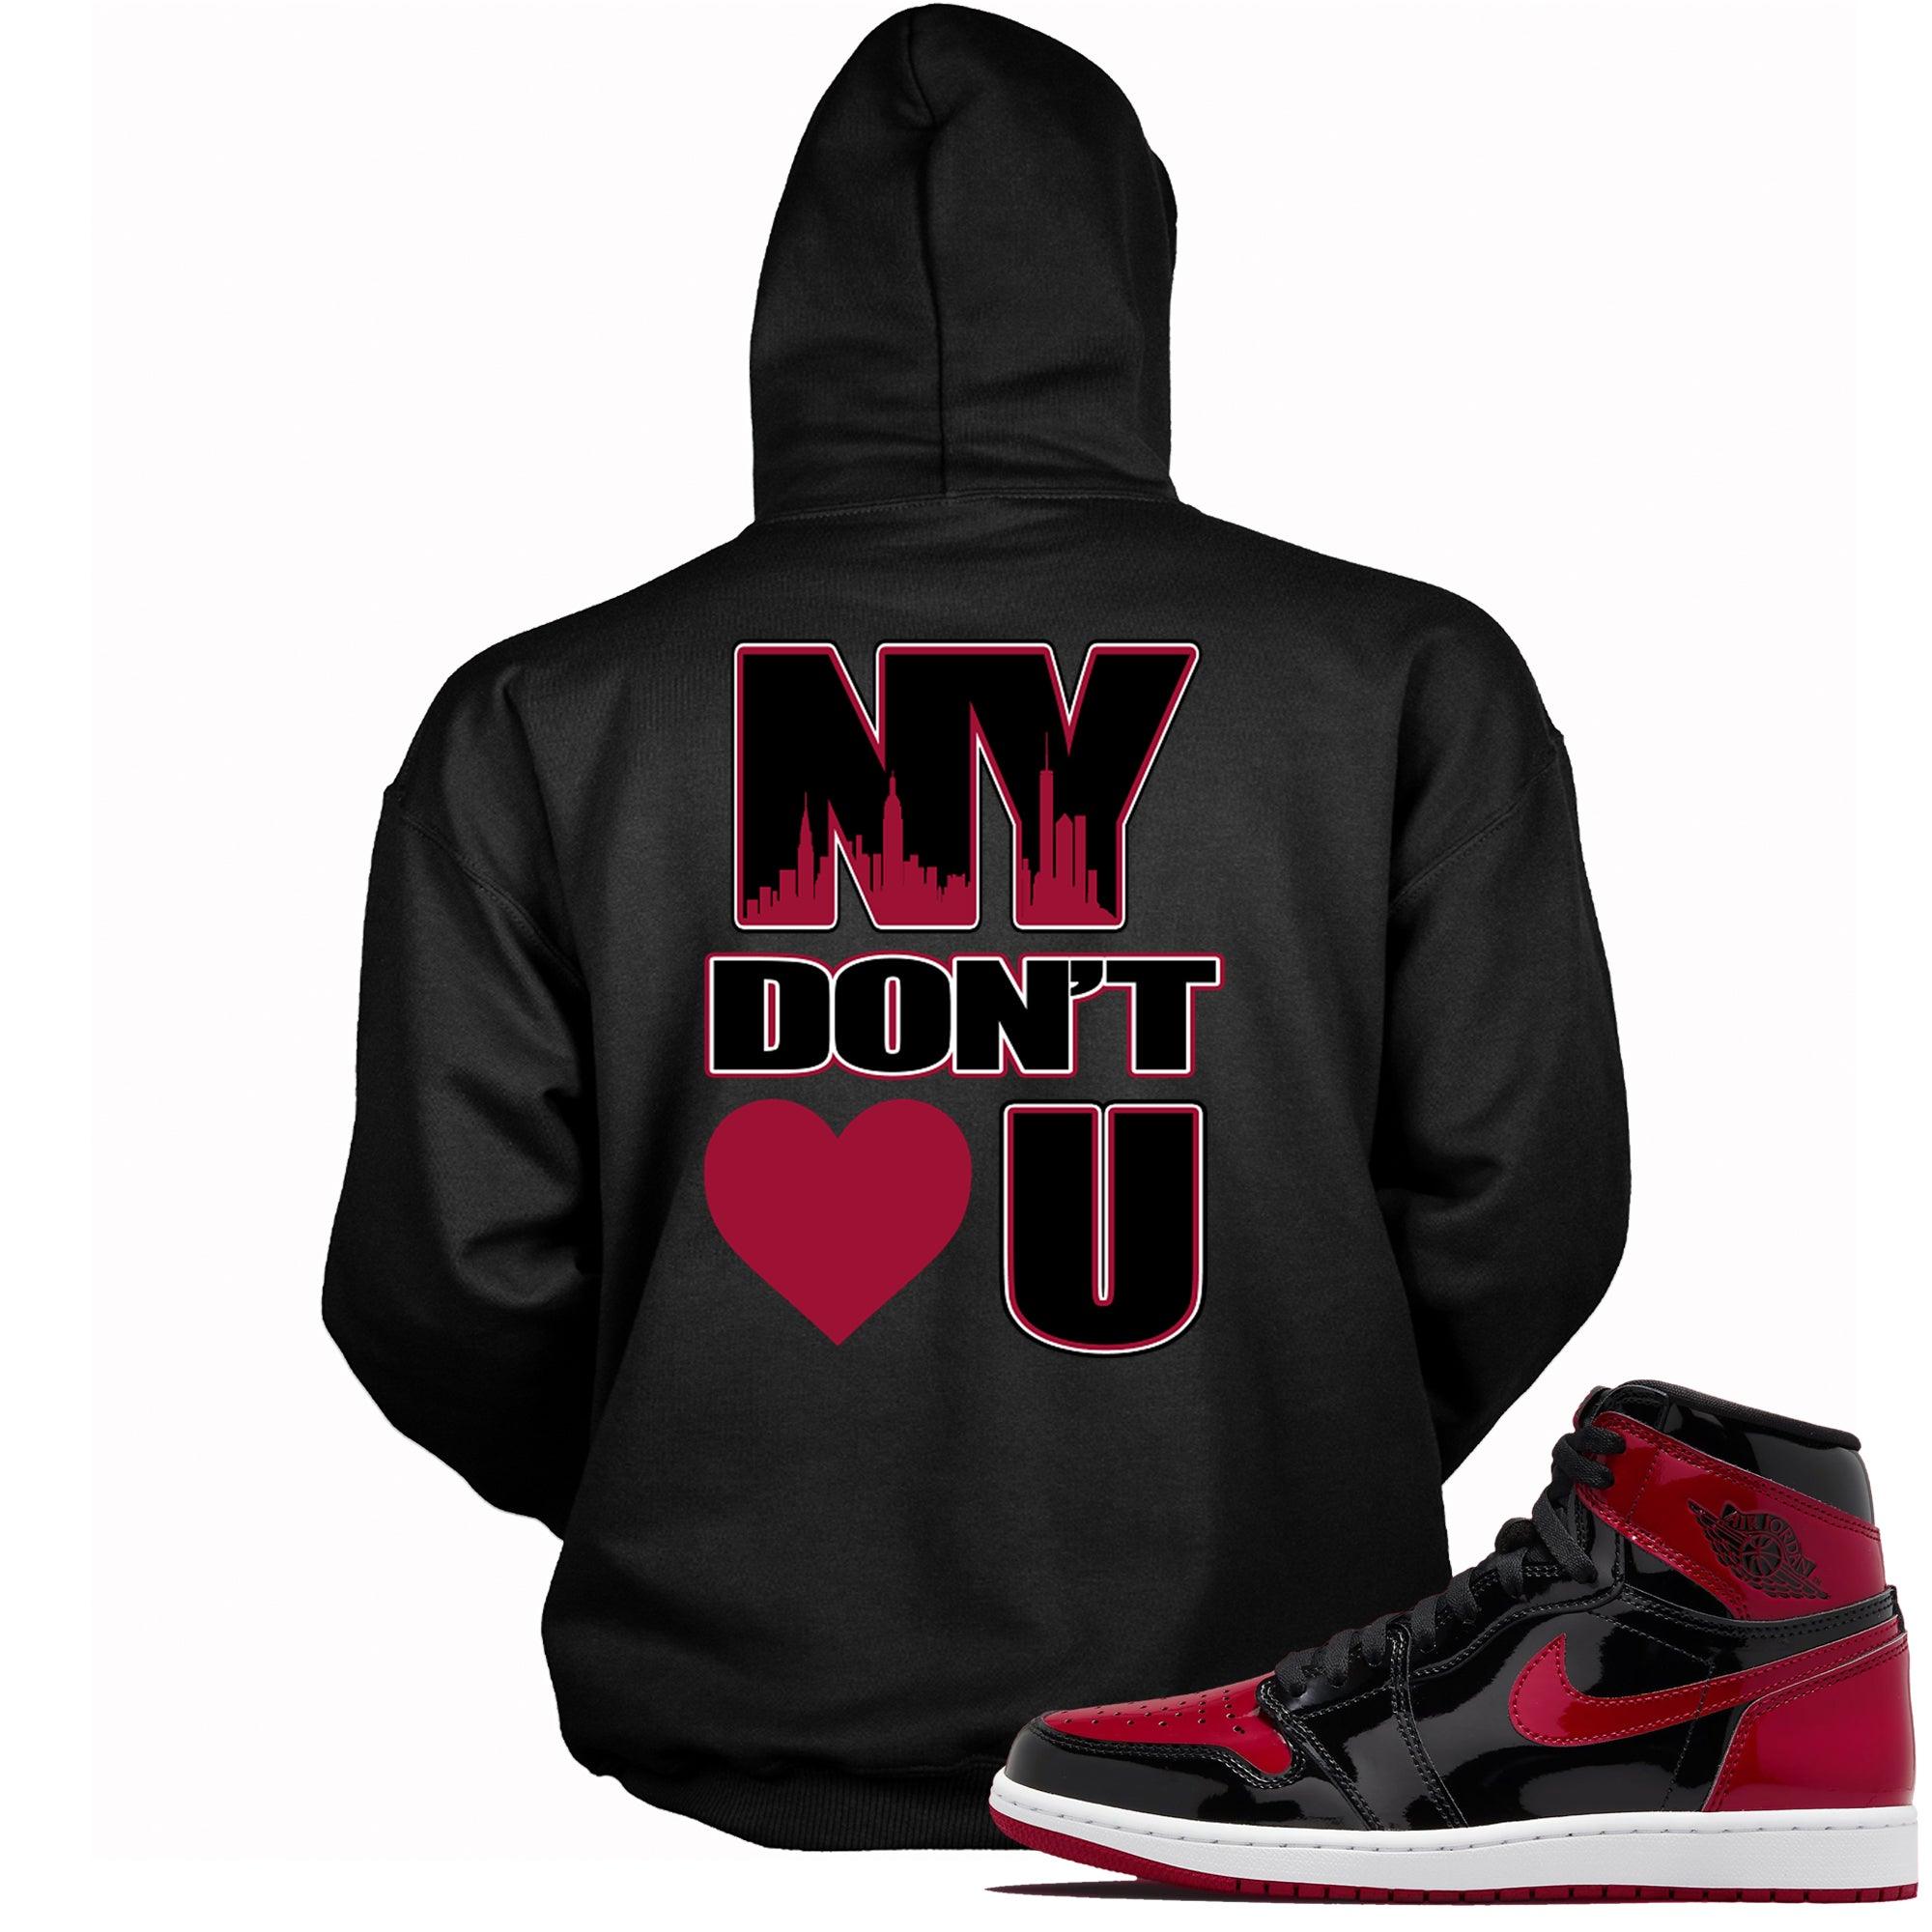 NY Don't Love You Hoodie Jordan 1 Patent Leather Bred Sneakers photo